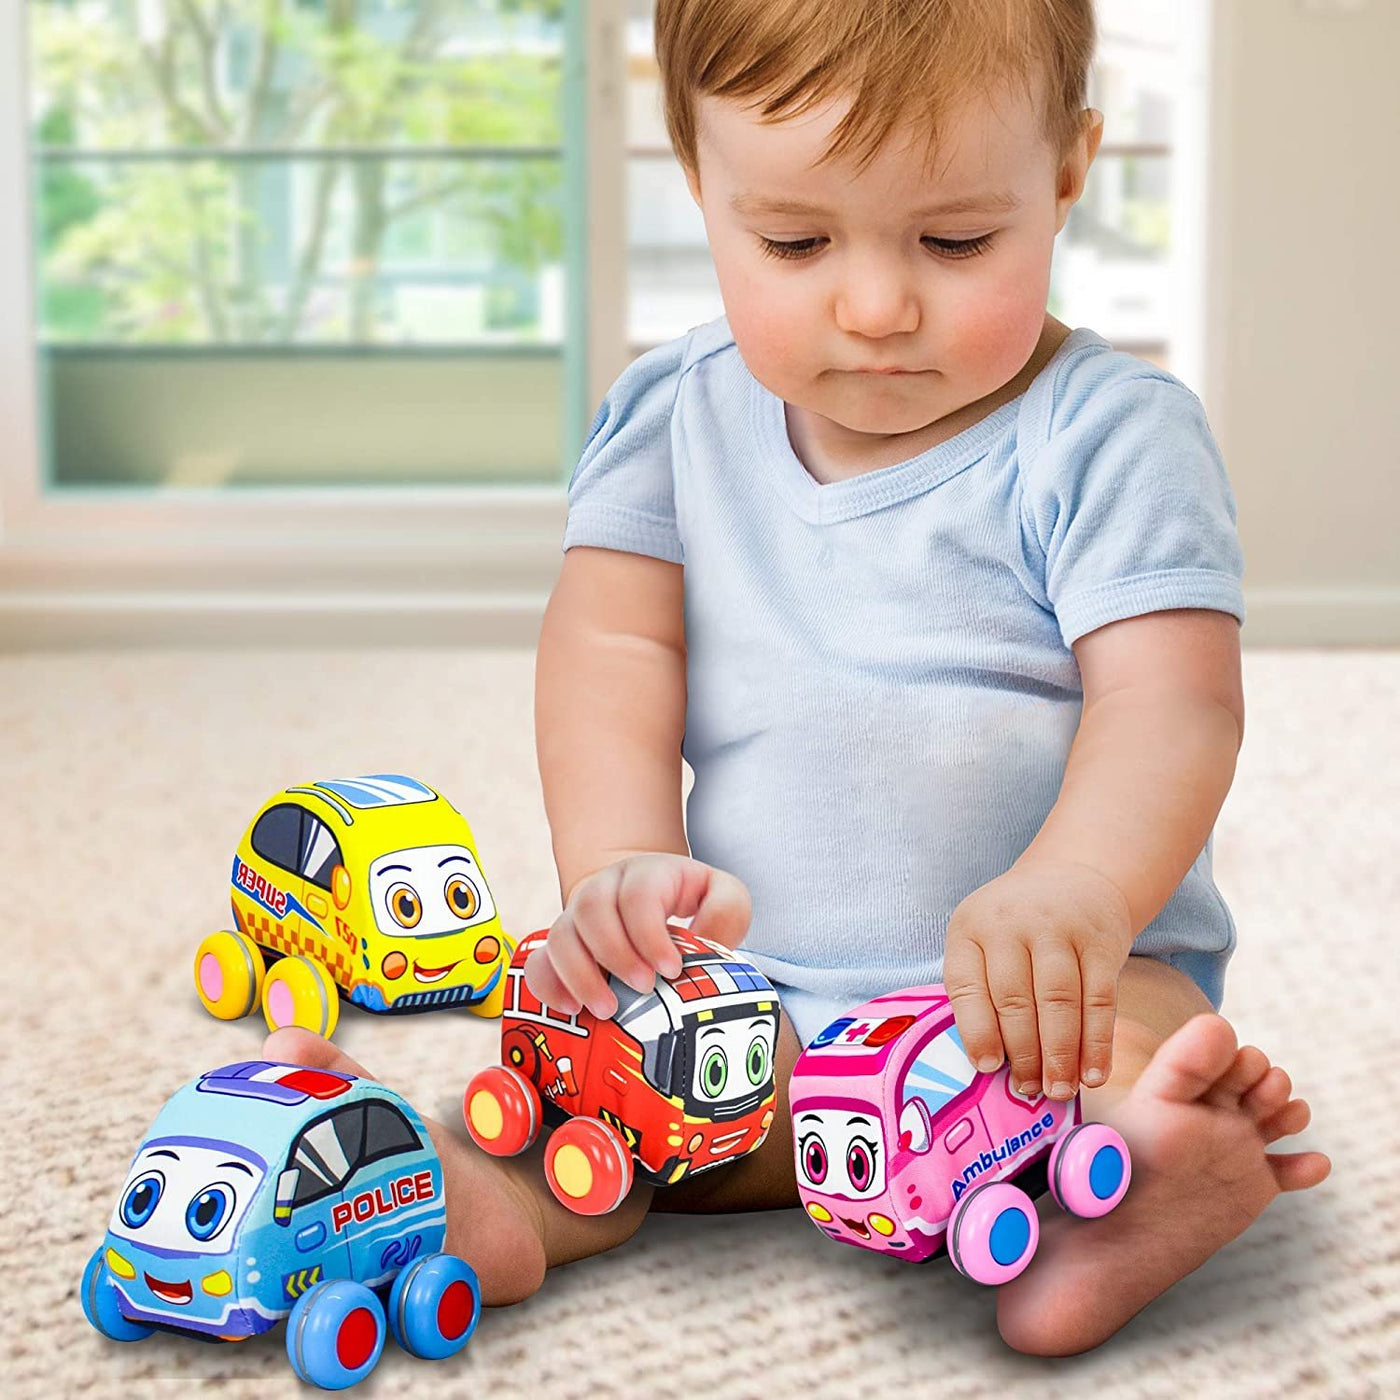 Pullback Plush Car Set, Set of 4, Soft-Sided Stuffed Cars with Pullback Mechanism, Cute and Colorful for Babies and Toddlers, Best Birthday Gift for Little Boys and Girls